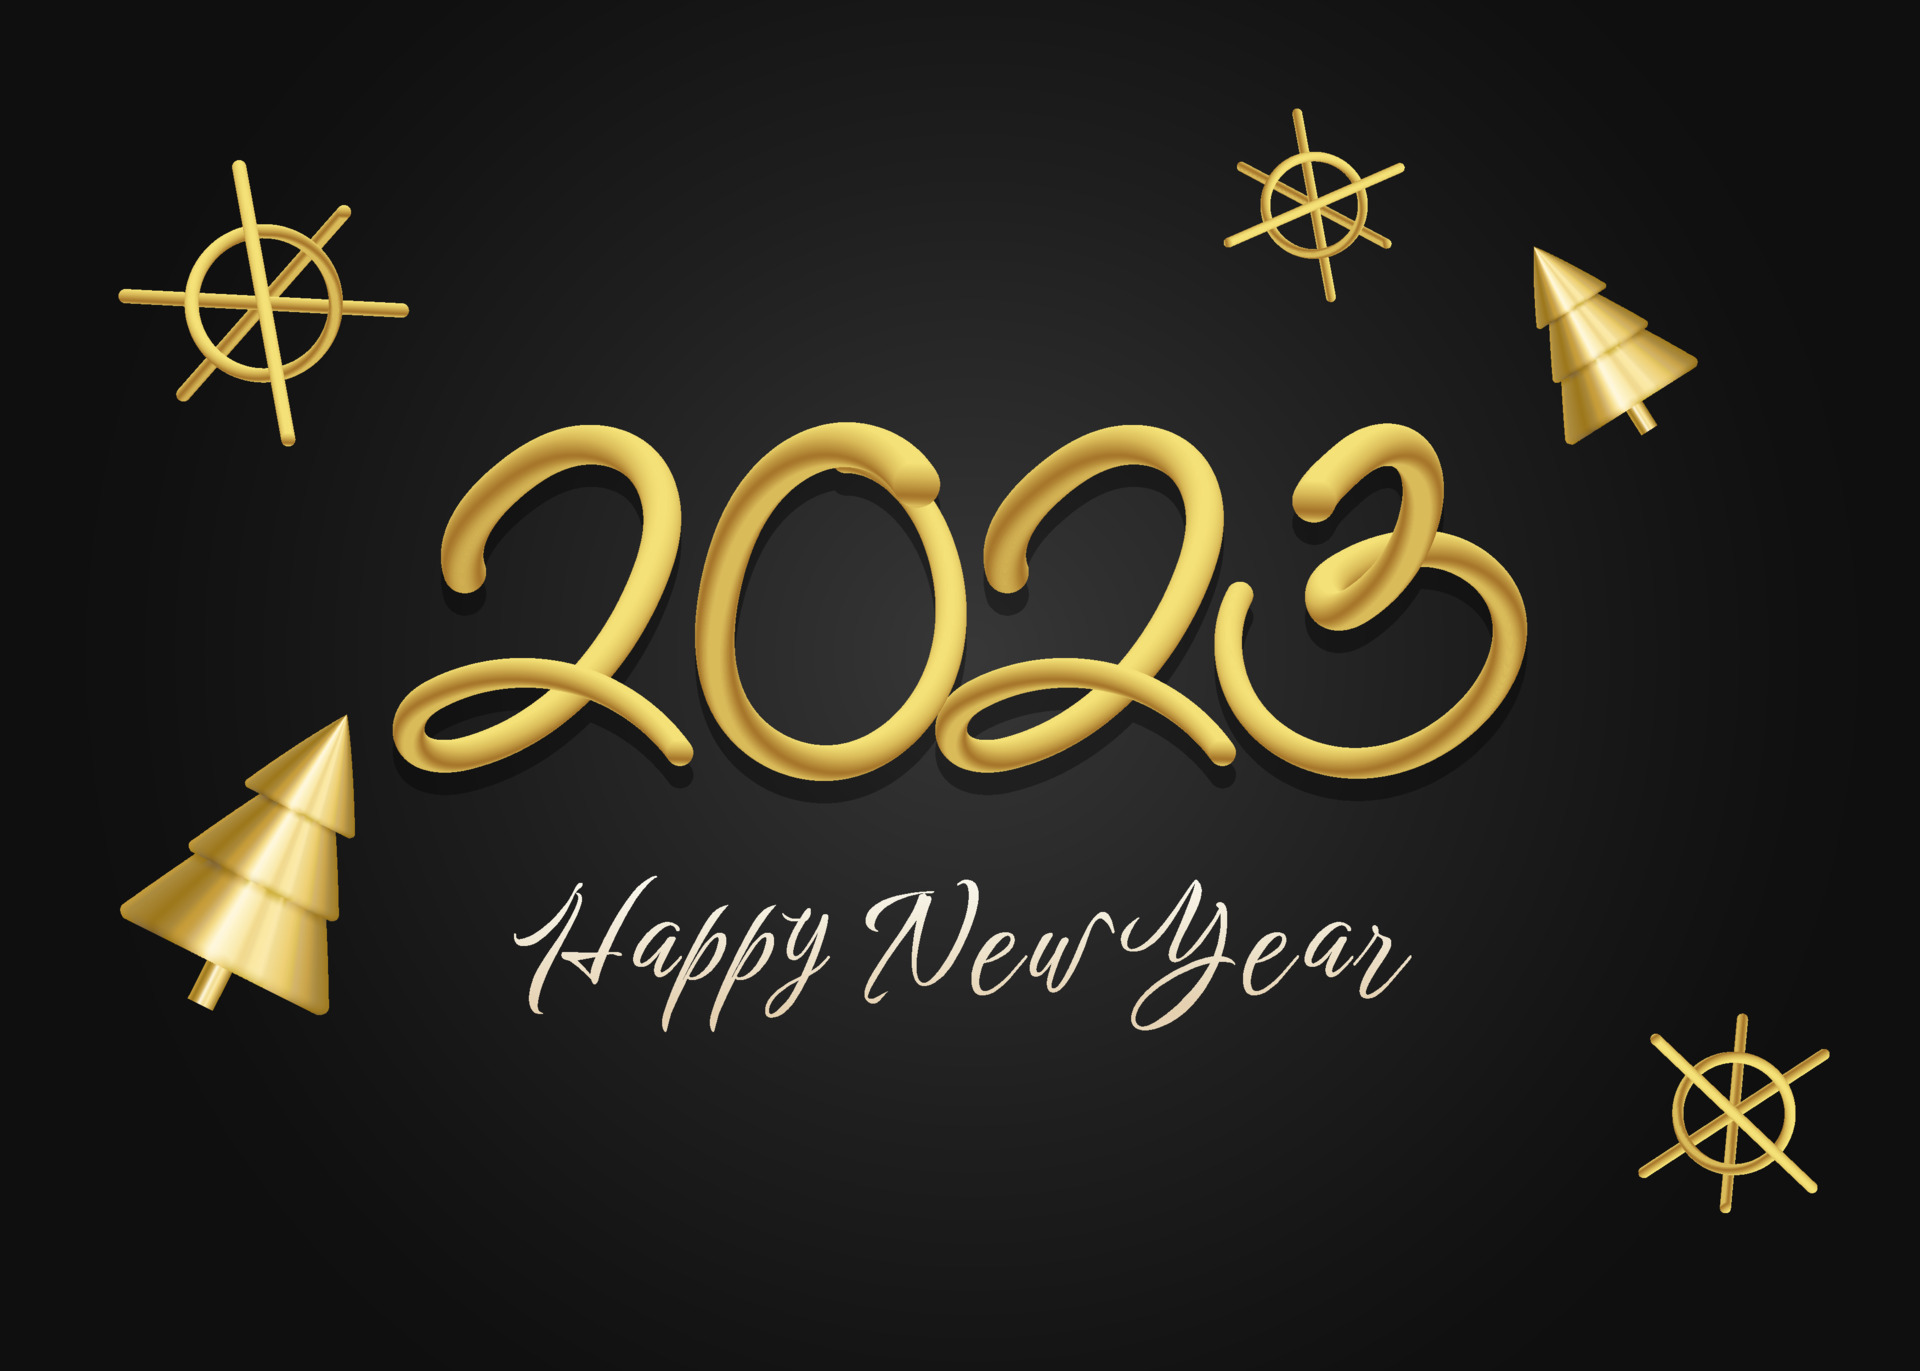 Happy new year 3D 2023 greeting wallpaper vector. Merry Christmas design greeting text with christmas decor snowflakes, 3D golden pine on a black background with luxury gold